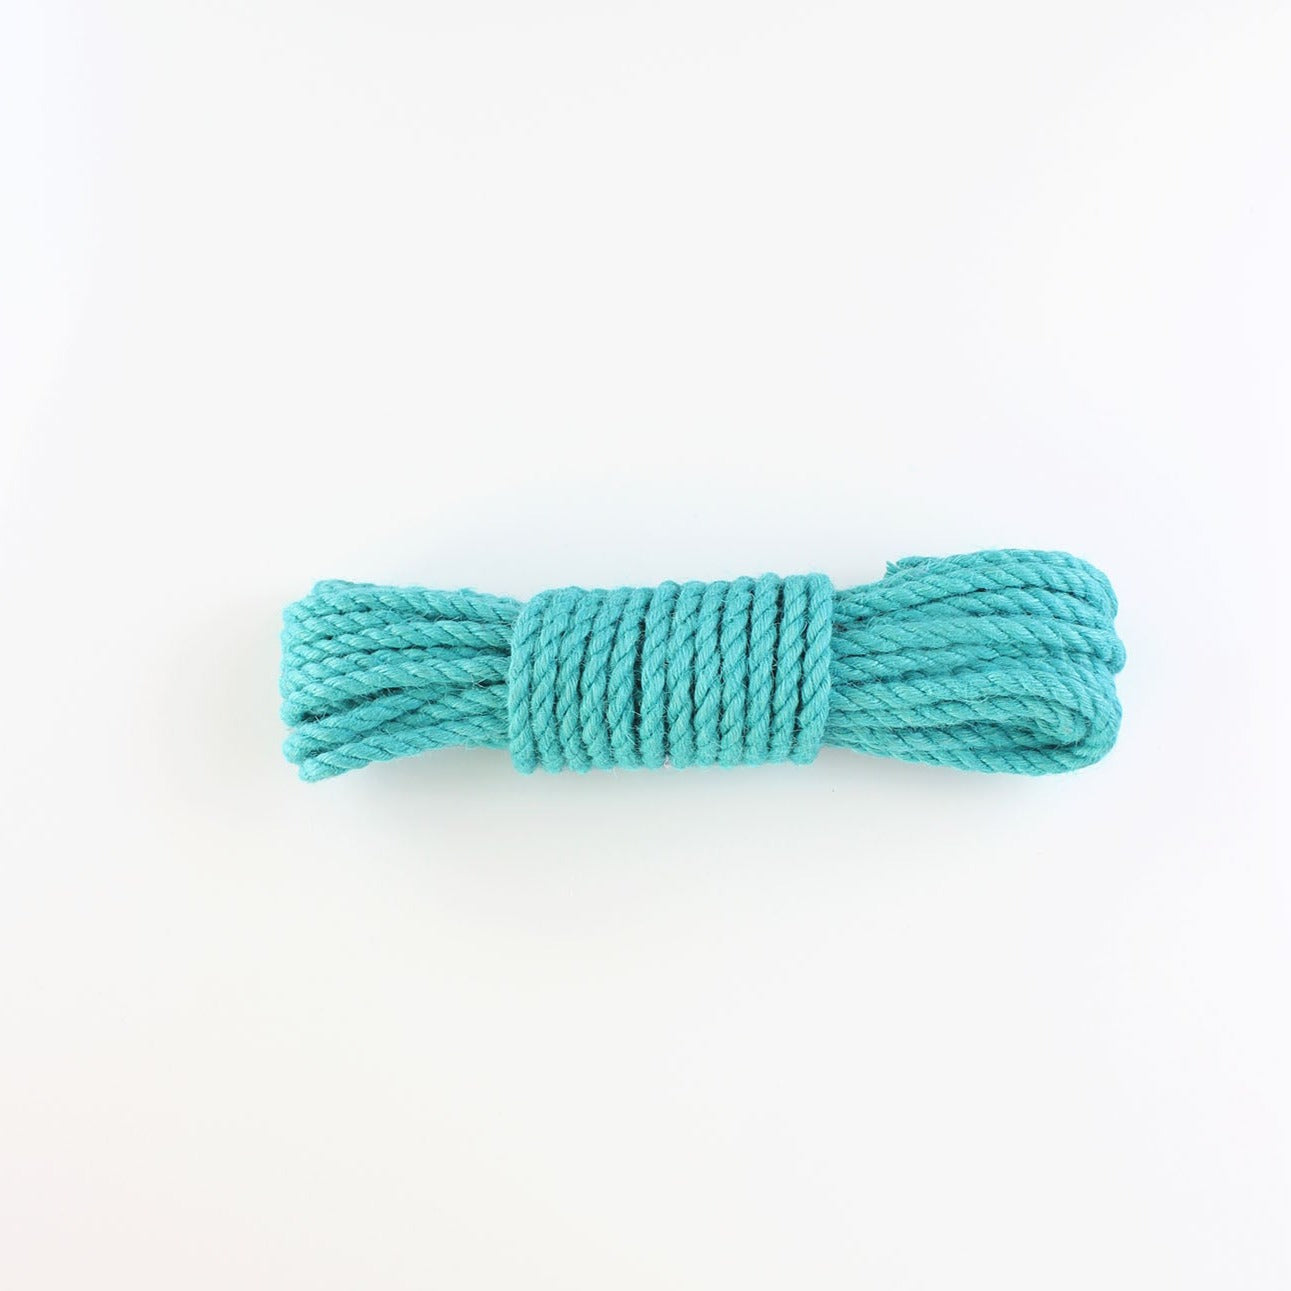 Turquoise jute rope on a white background.